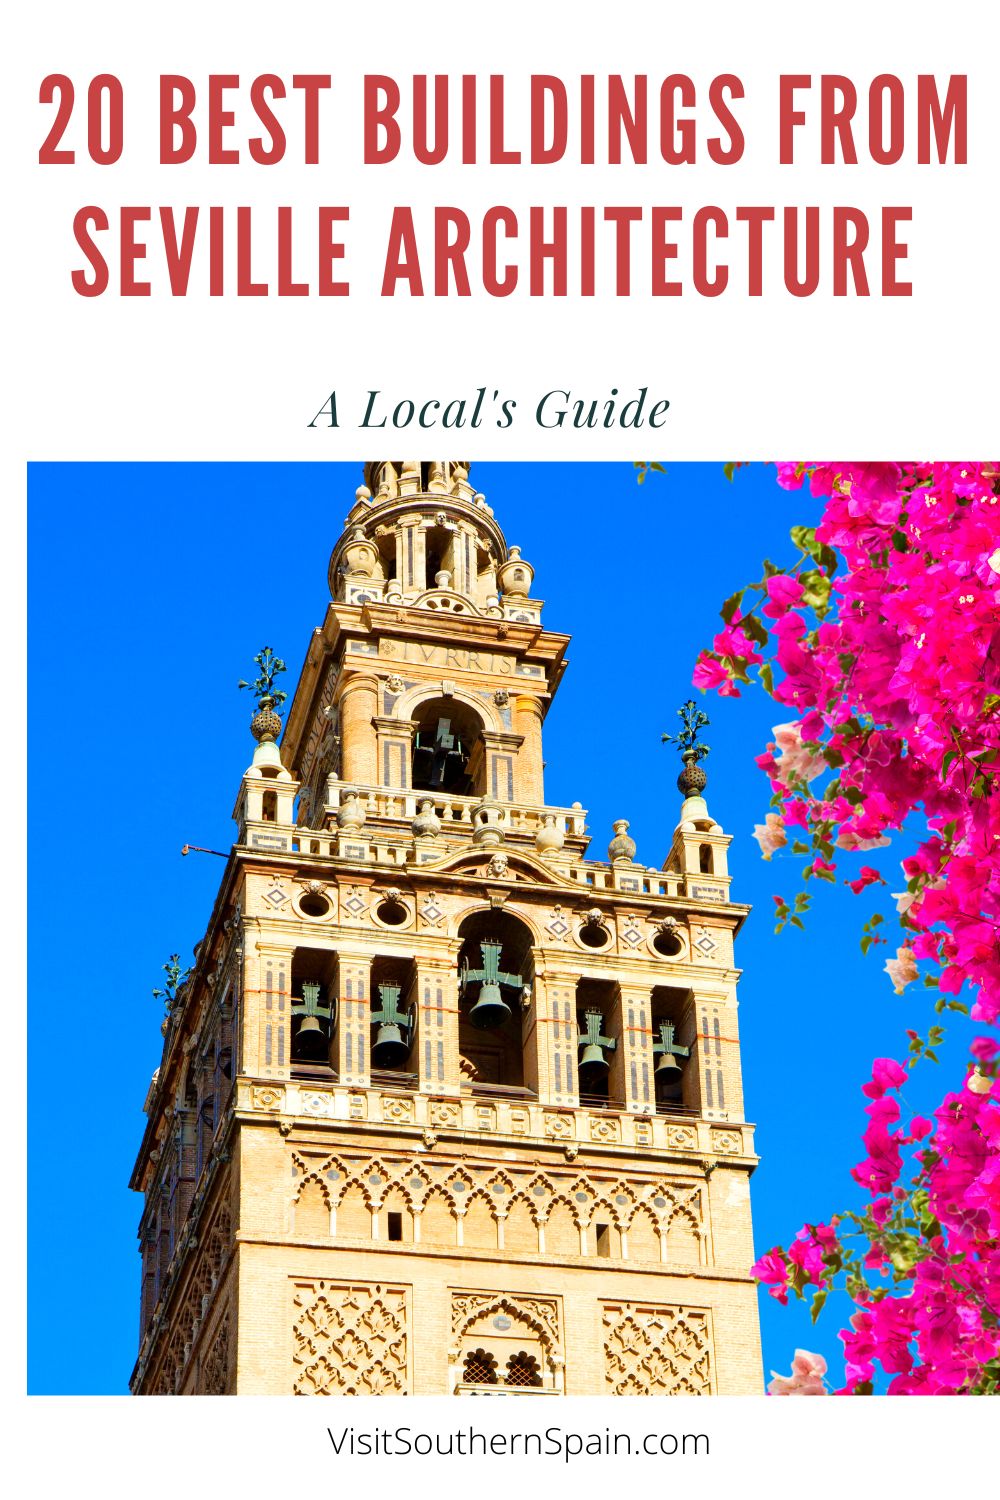 Are you interested in Seville Architecture and visiting its most beautiful buildings? Seville's historical buildings are some of the best in the world, having Roman, Moorish, and Christian influences. Movies like Star Wars and Game of Thrones were filmed in this Andalucian city, its impressive architecture captured the eyes of many people throughout the years. Seville architecture must be at least once in life celebrated and visited. #sevillearchitecture #buildinginseville #seville #andalucia